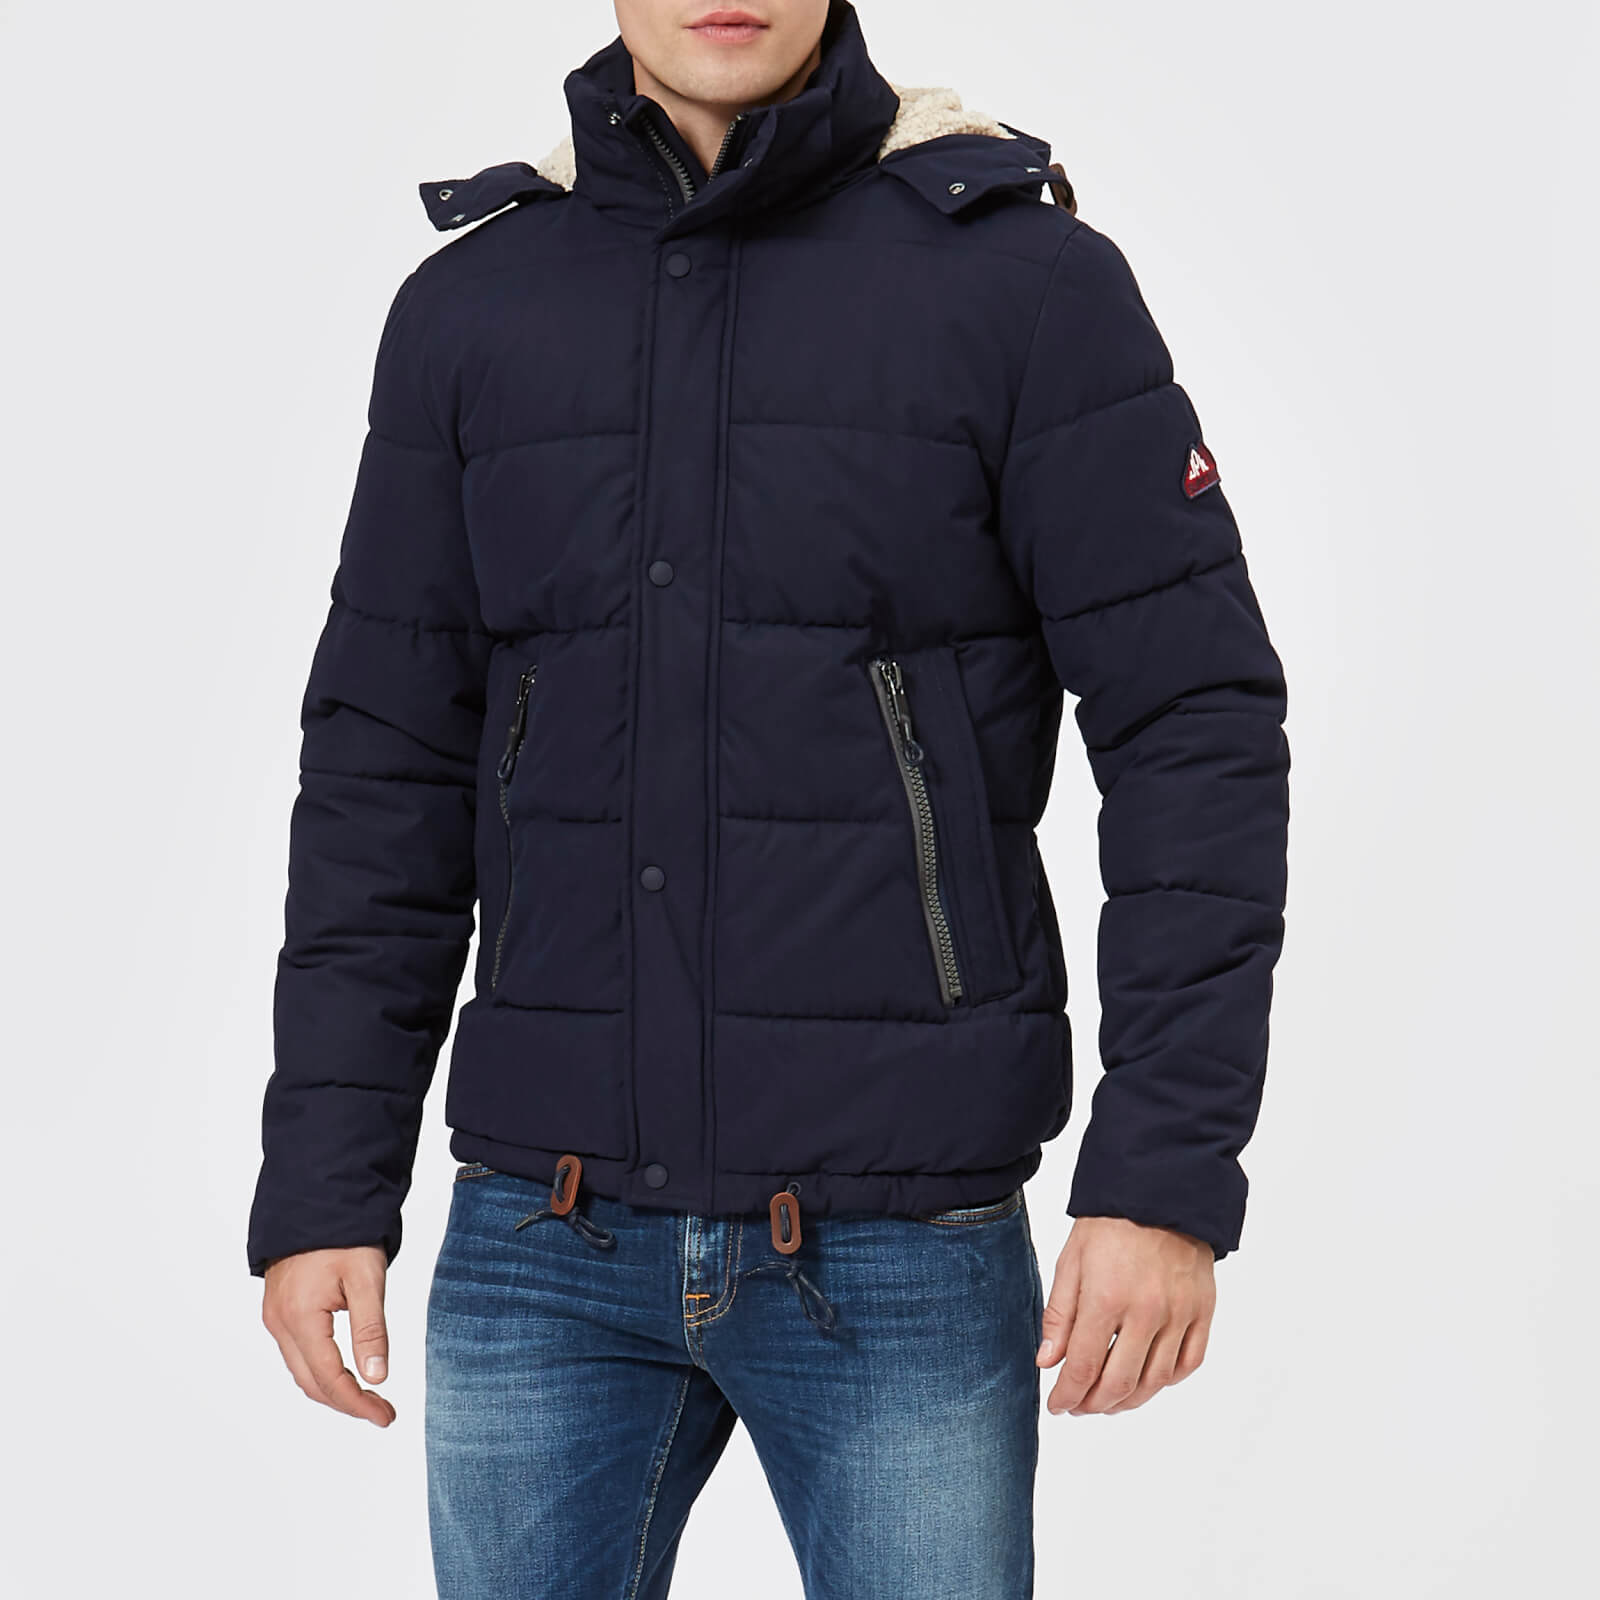 Superdry New Academy Navy Hooded Padded Gilet 56T 